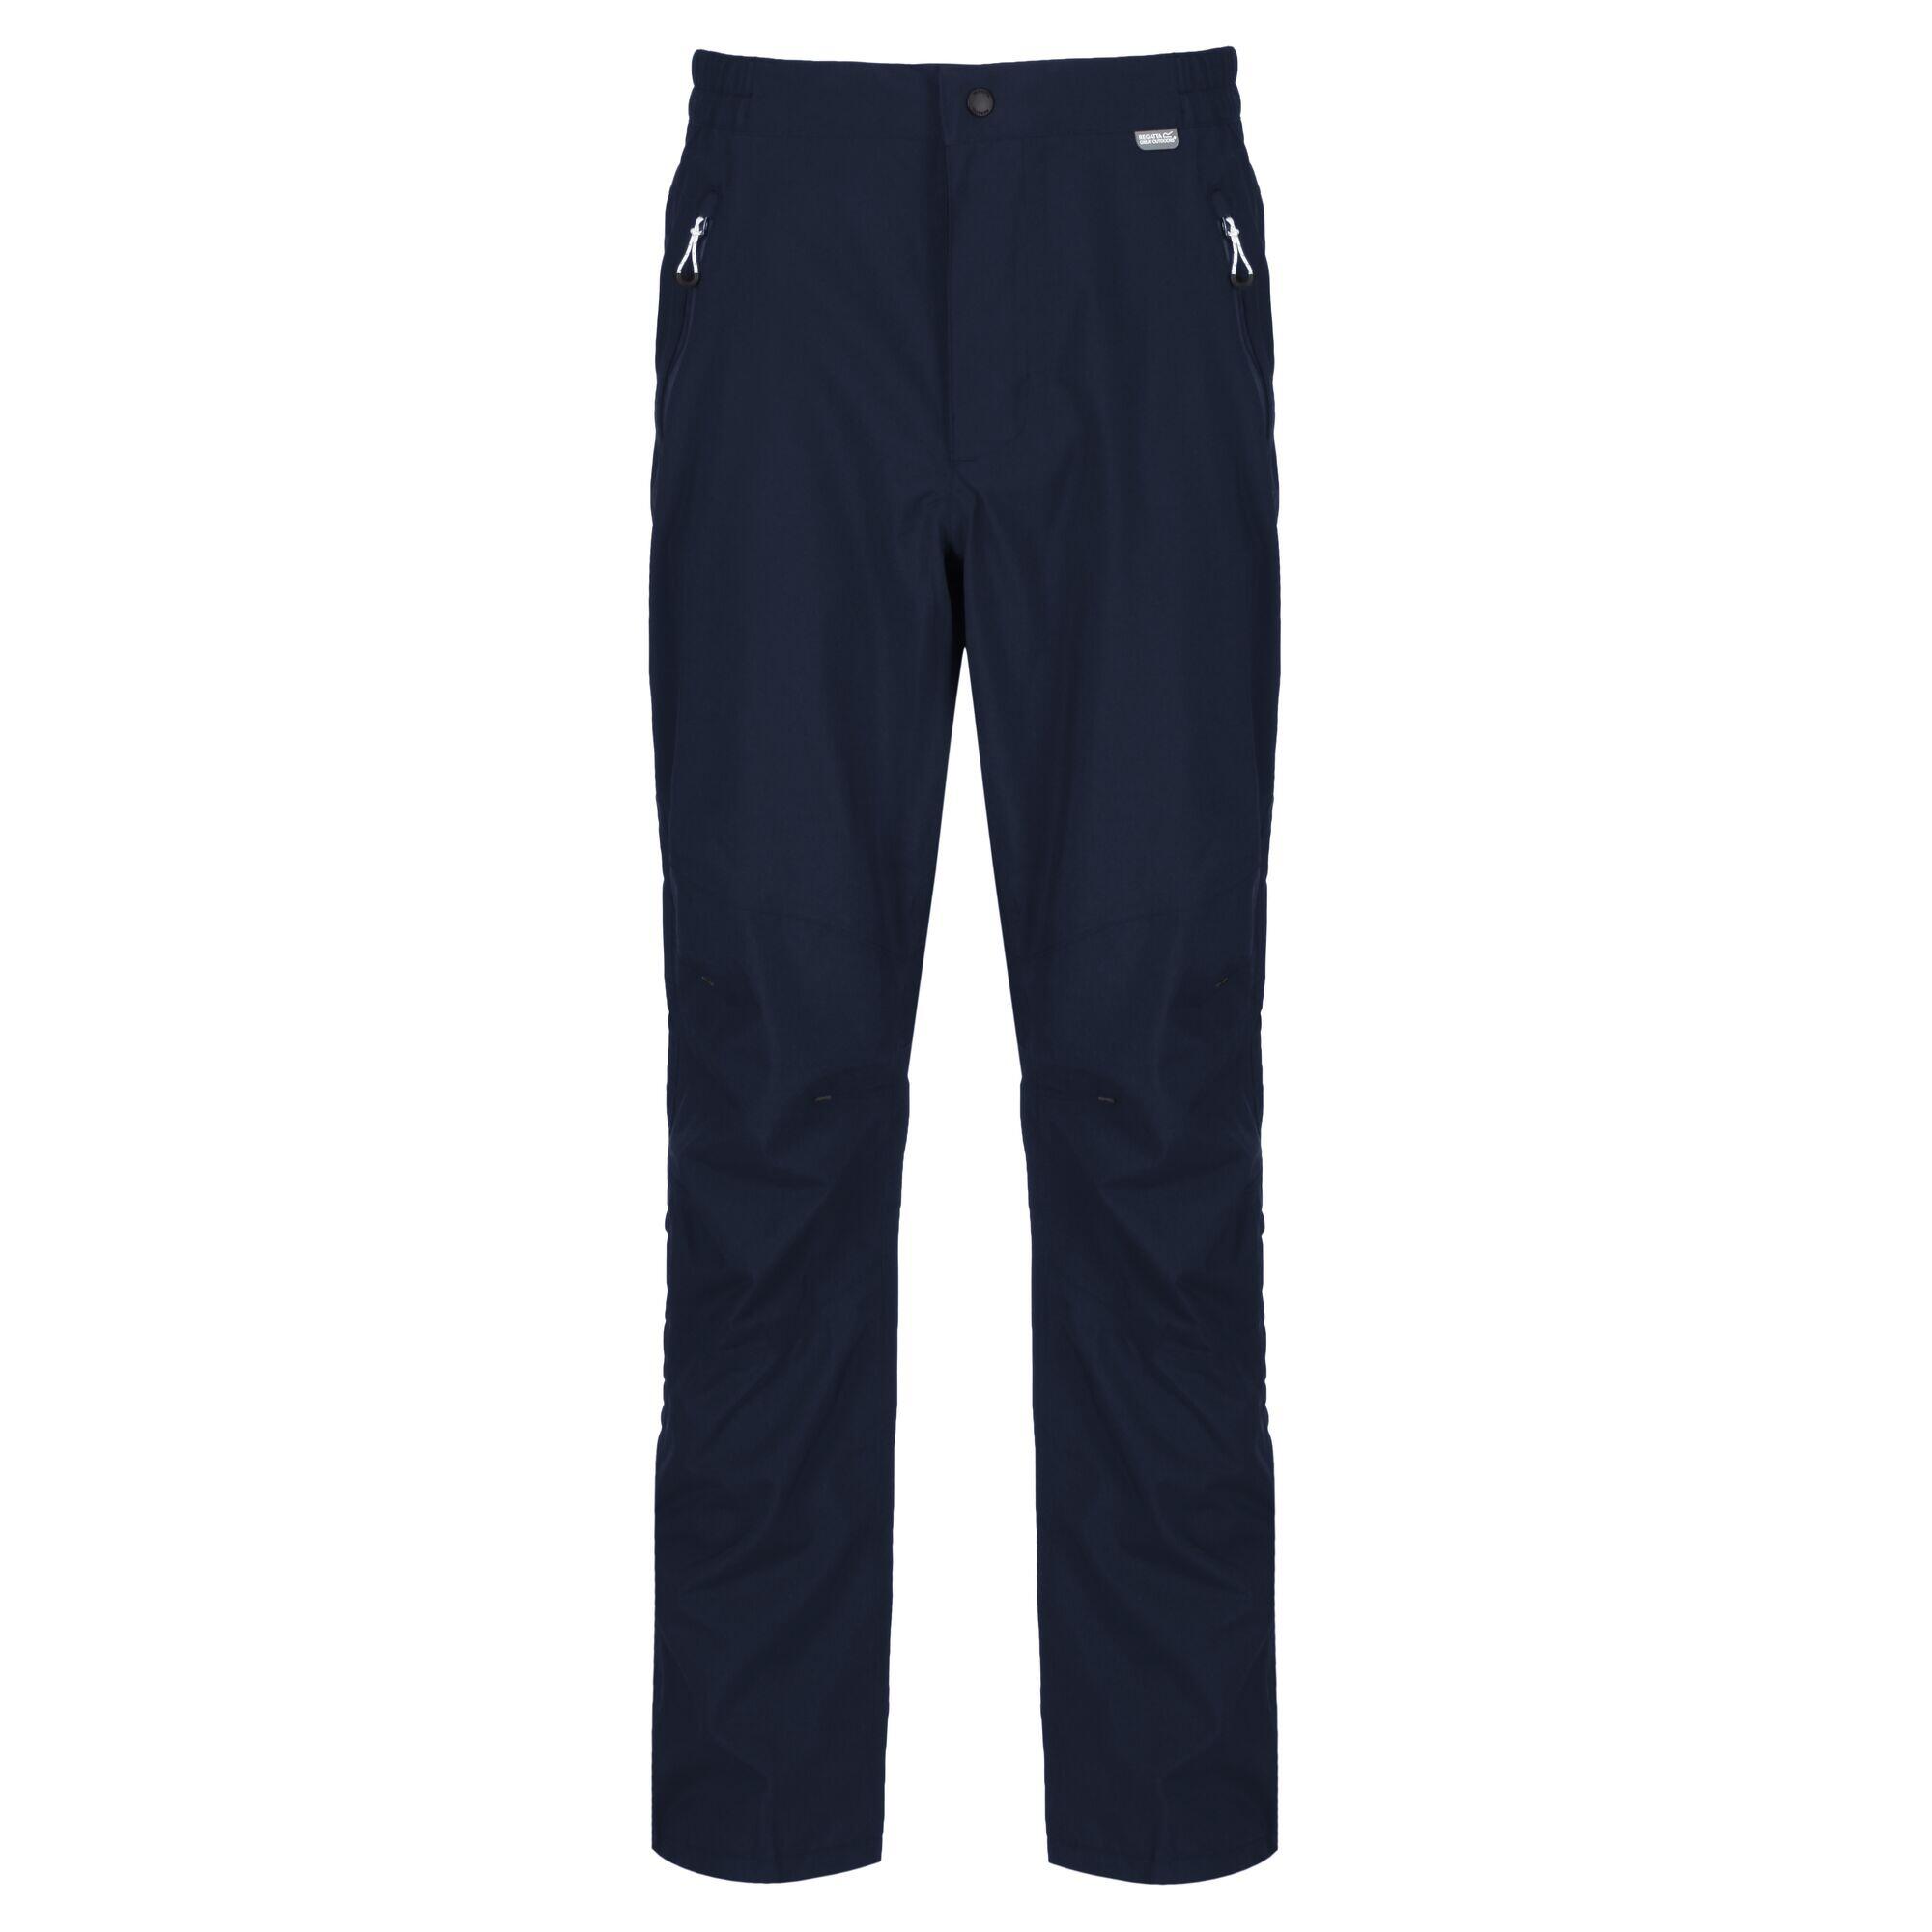 Highton Stretch Men's Hiking Overtrousers - Navy 5/6